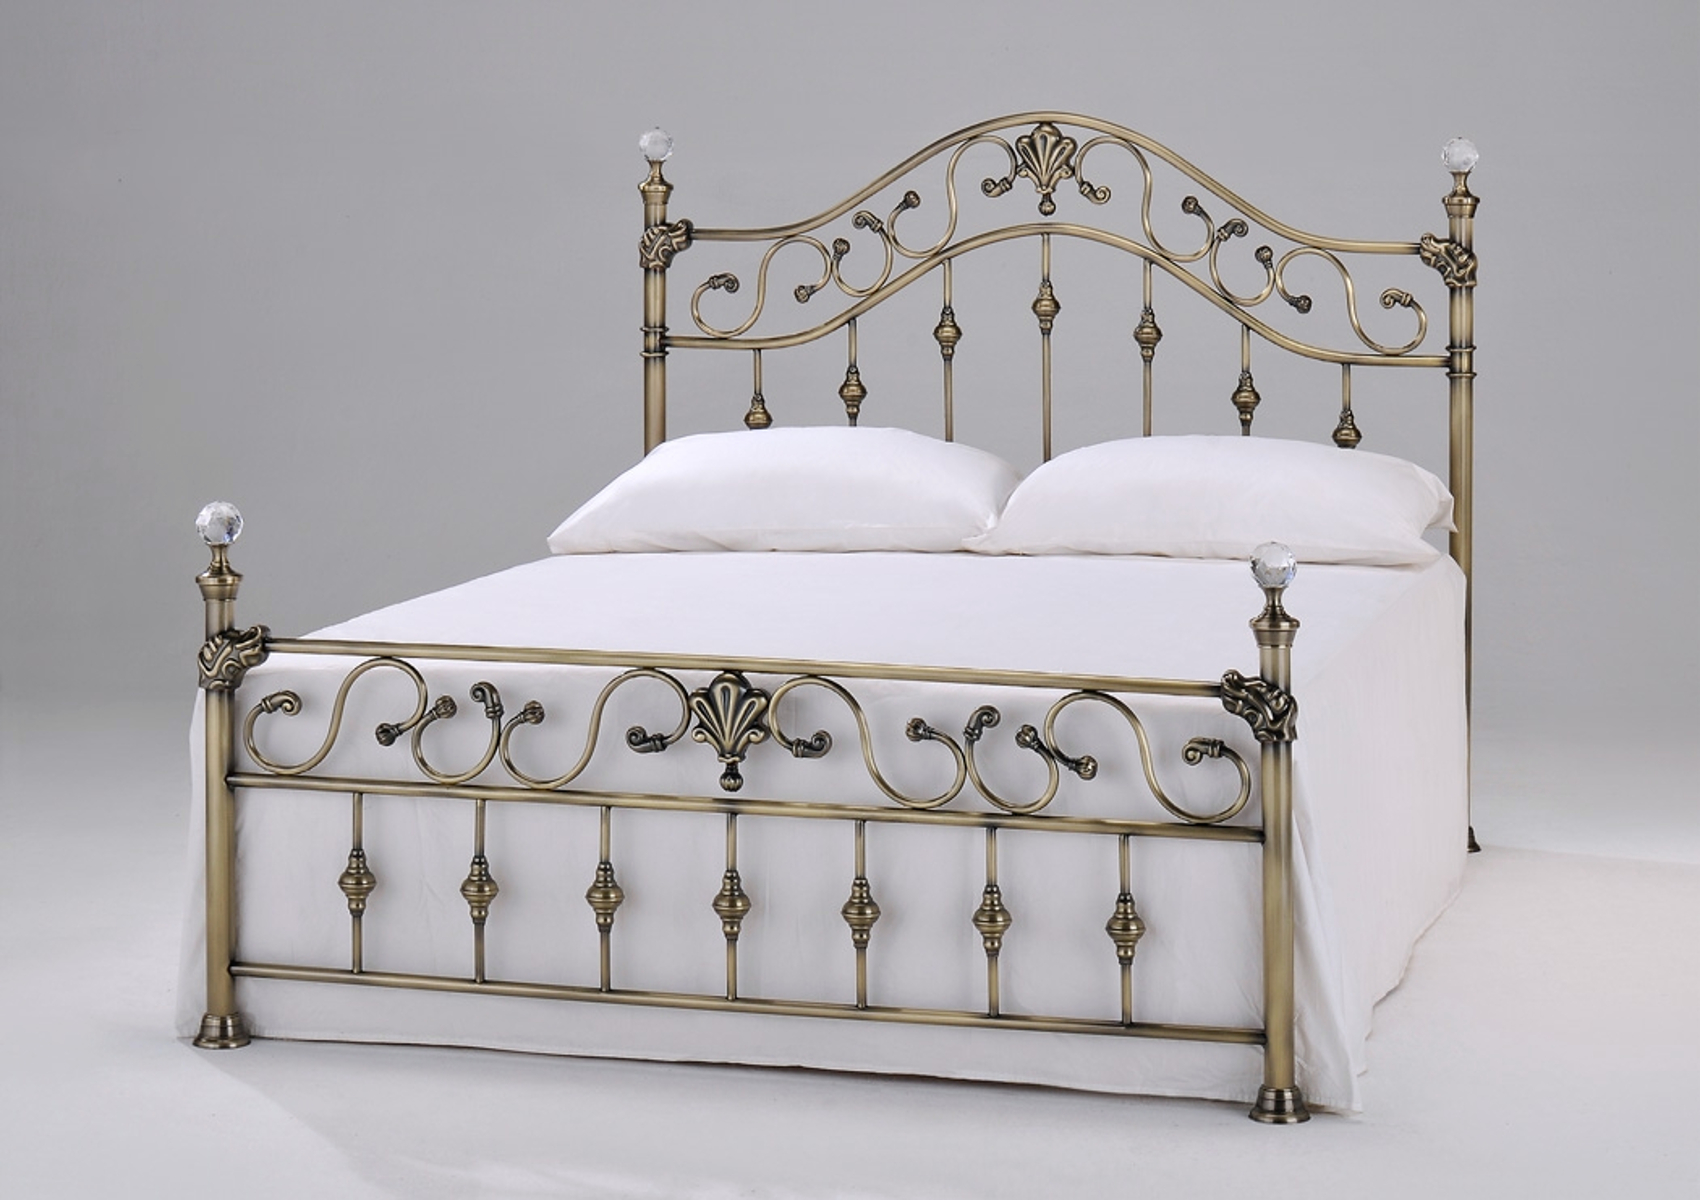 View Harmony Antique Brass Metal Double Bed Time4Sleep information